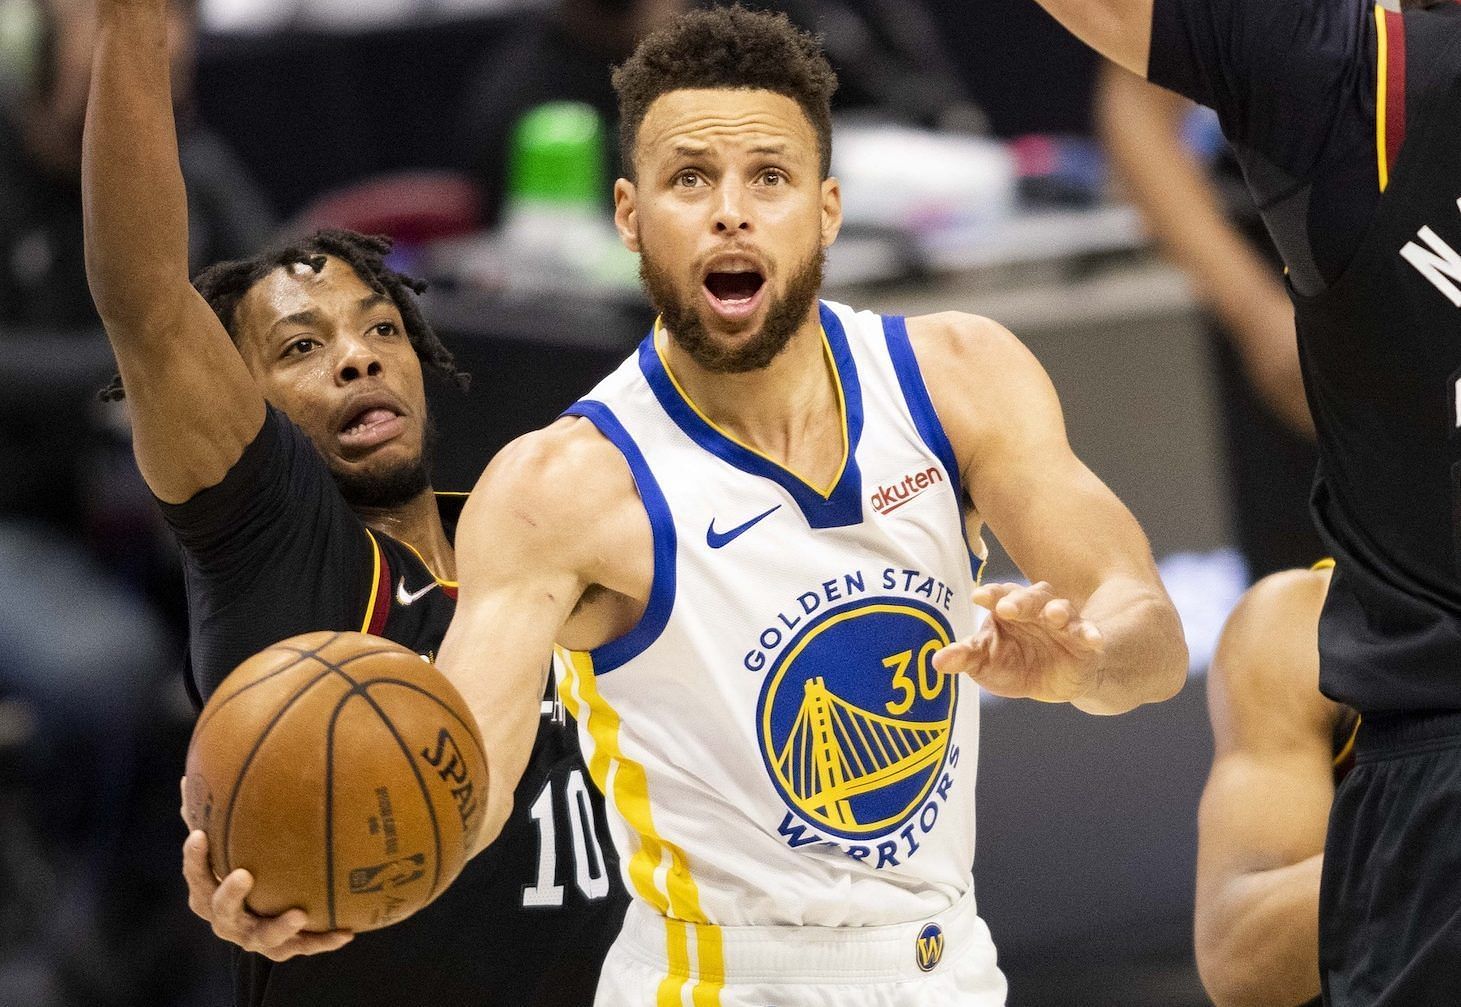 The Cleveland Cavaliers are also short-handed, which could sway the Warriors towards keeping Steph Curry under wraps for this game [Photo: Cavaliers Nation]